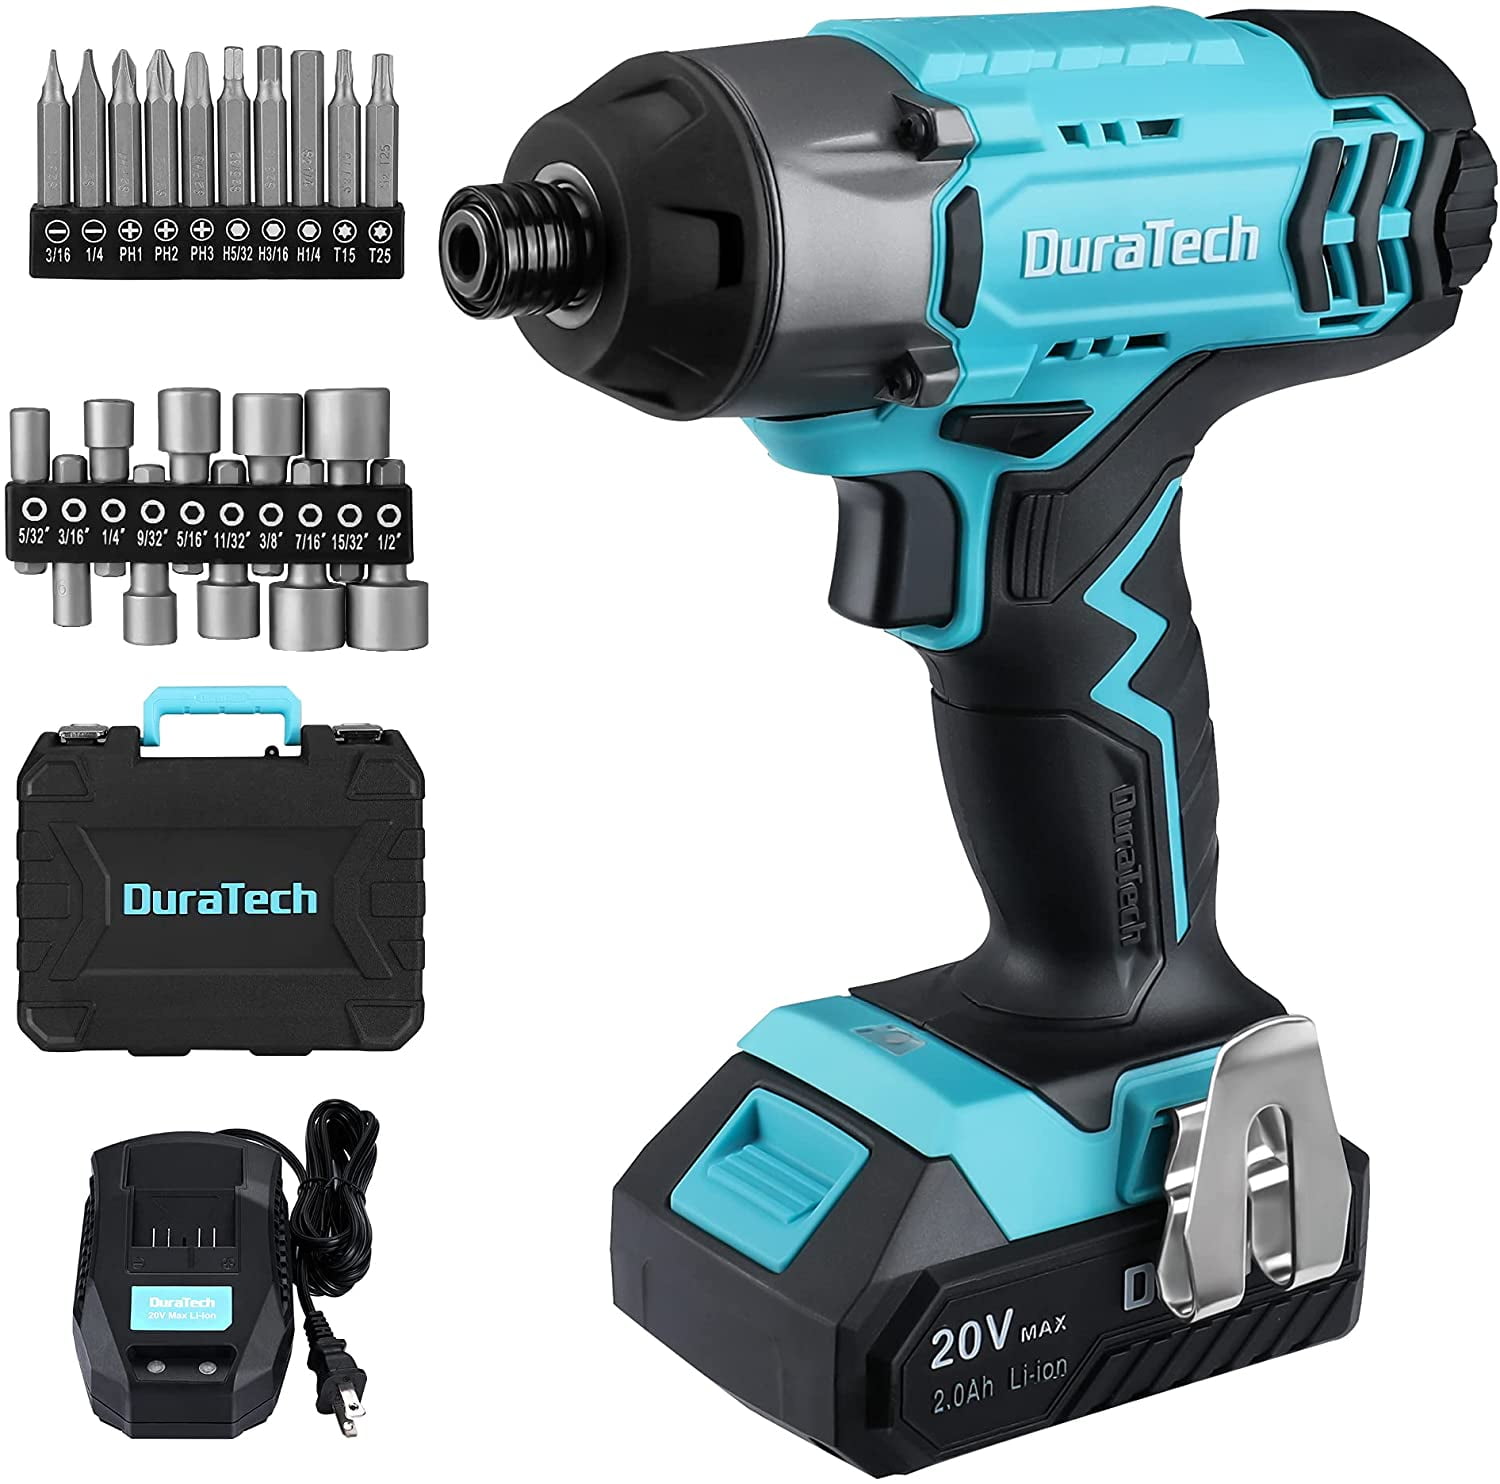 DURATECH 20V Cordless Impact Driver Kit, 1/4-inch Power Impact Driver with  20-Piece Durable Bits, 1500In-lbs, 2600RPM, LED Light, 2.0Ah Battery and  Fast Charger Included